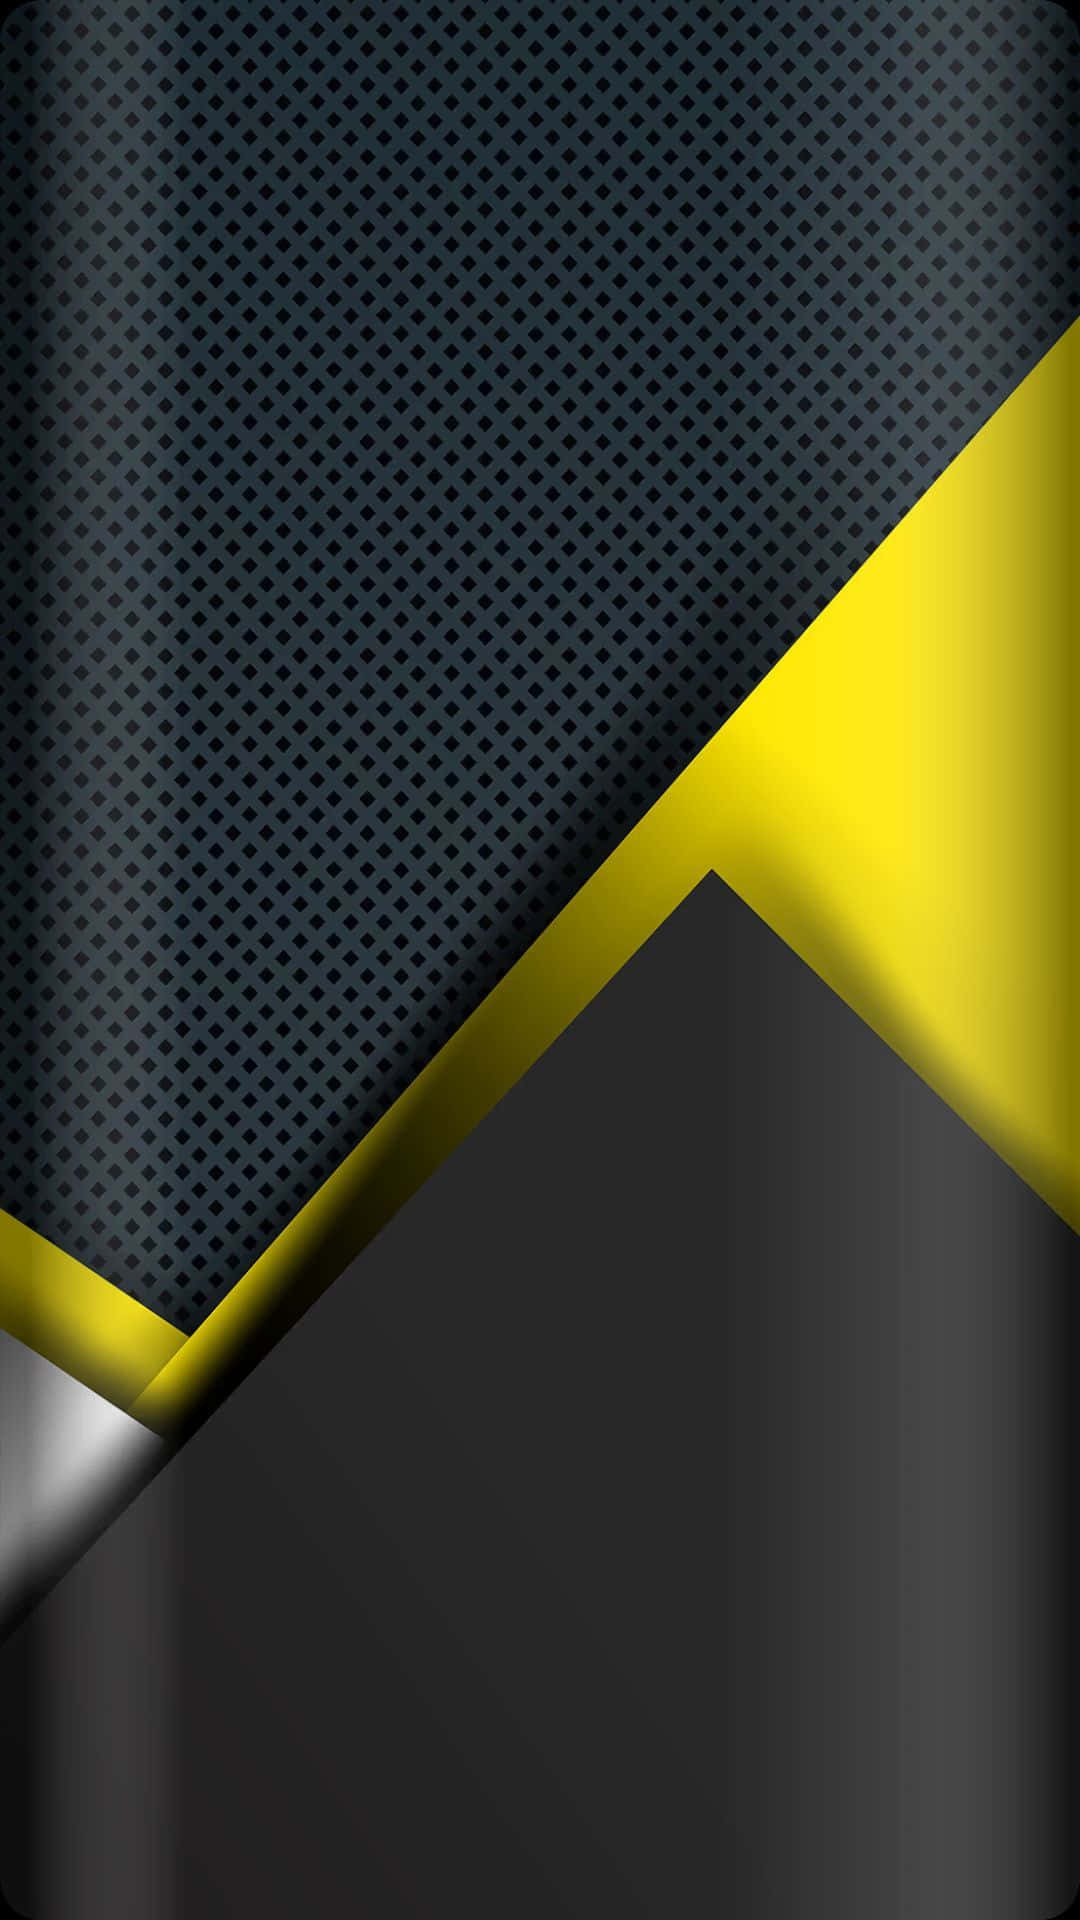 A striking yellow and black background